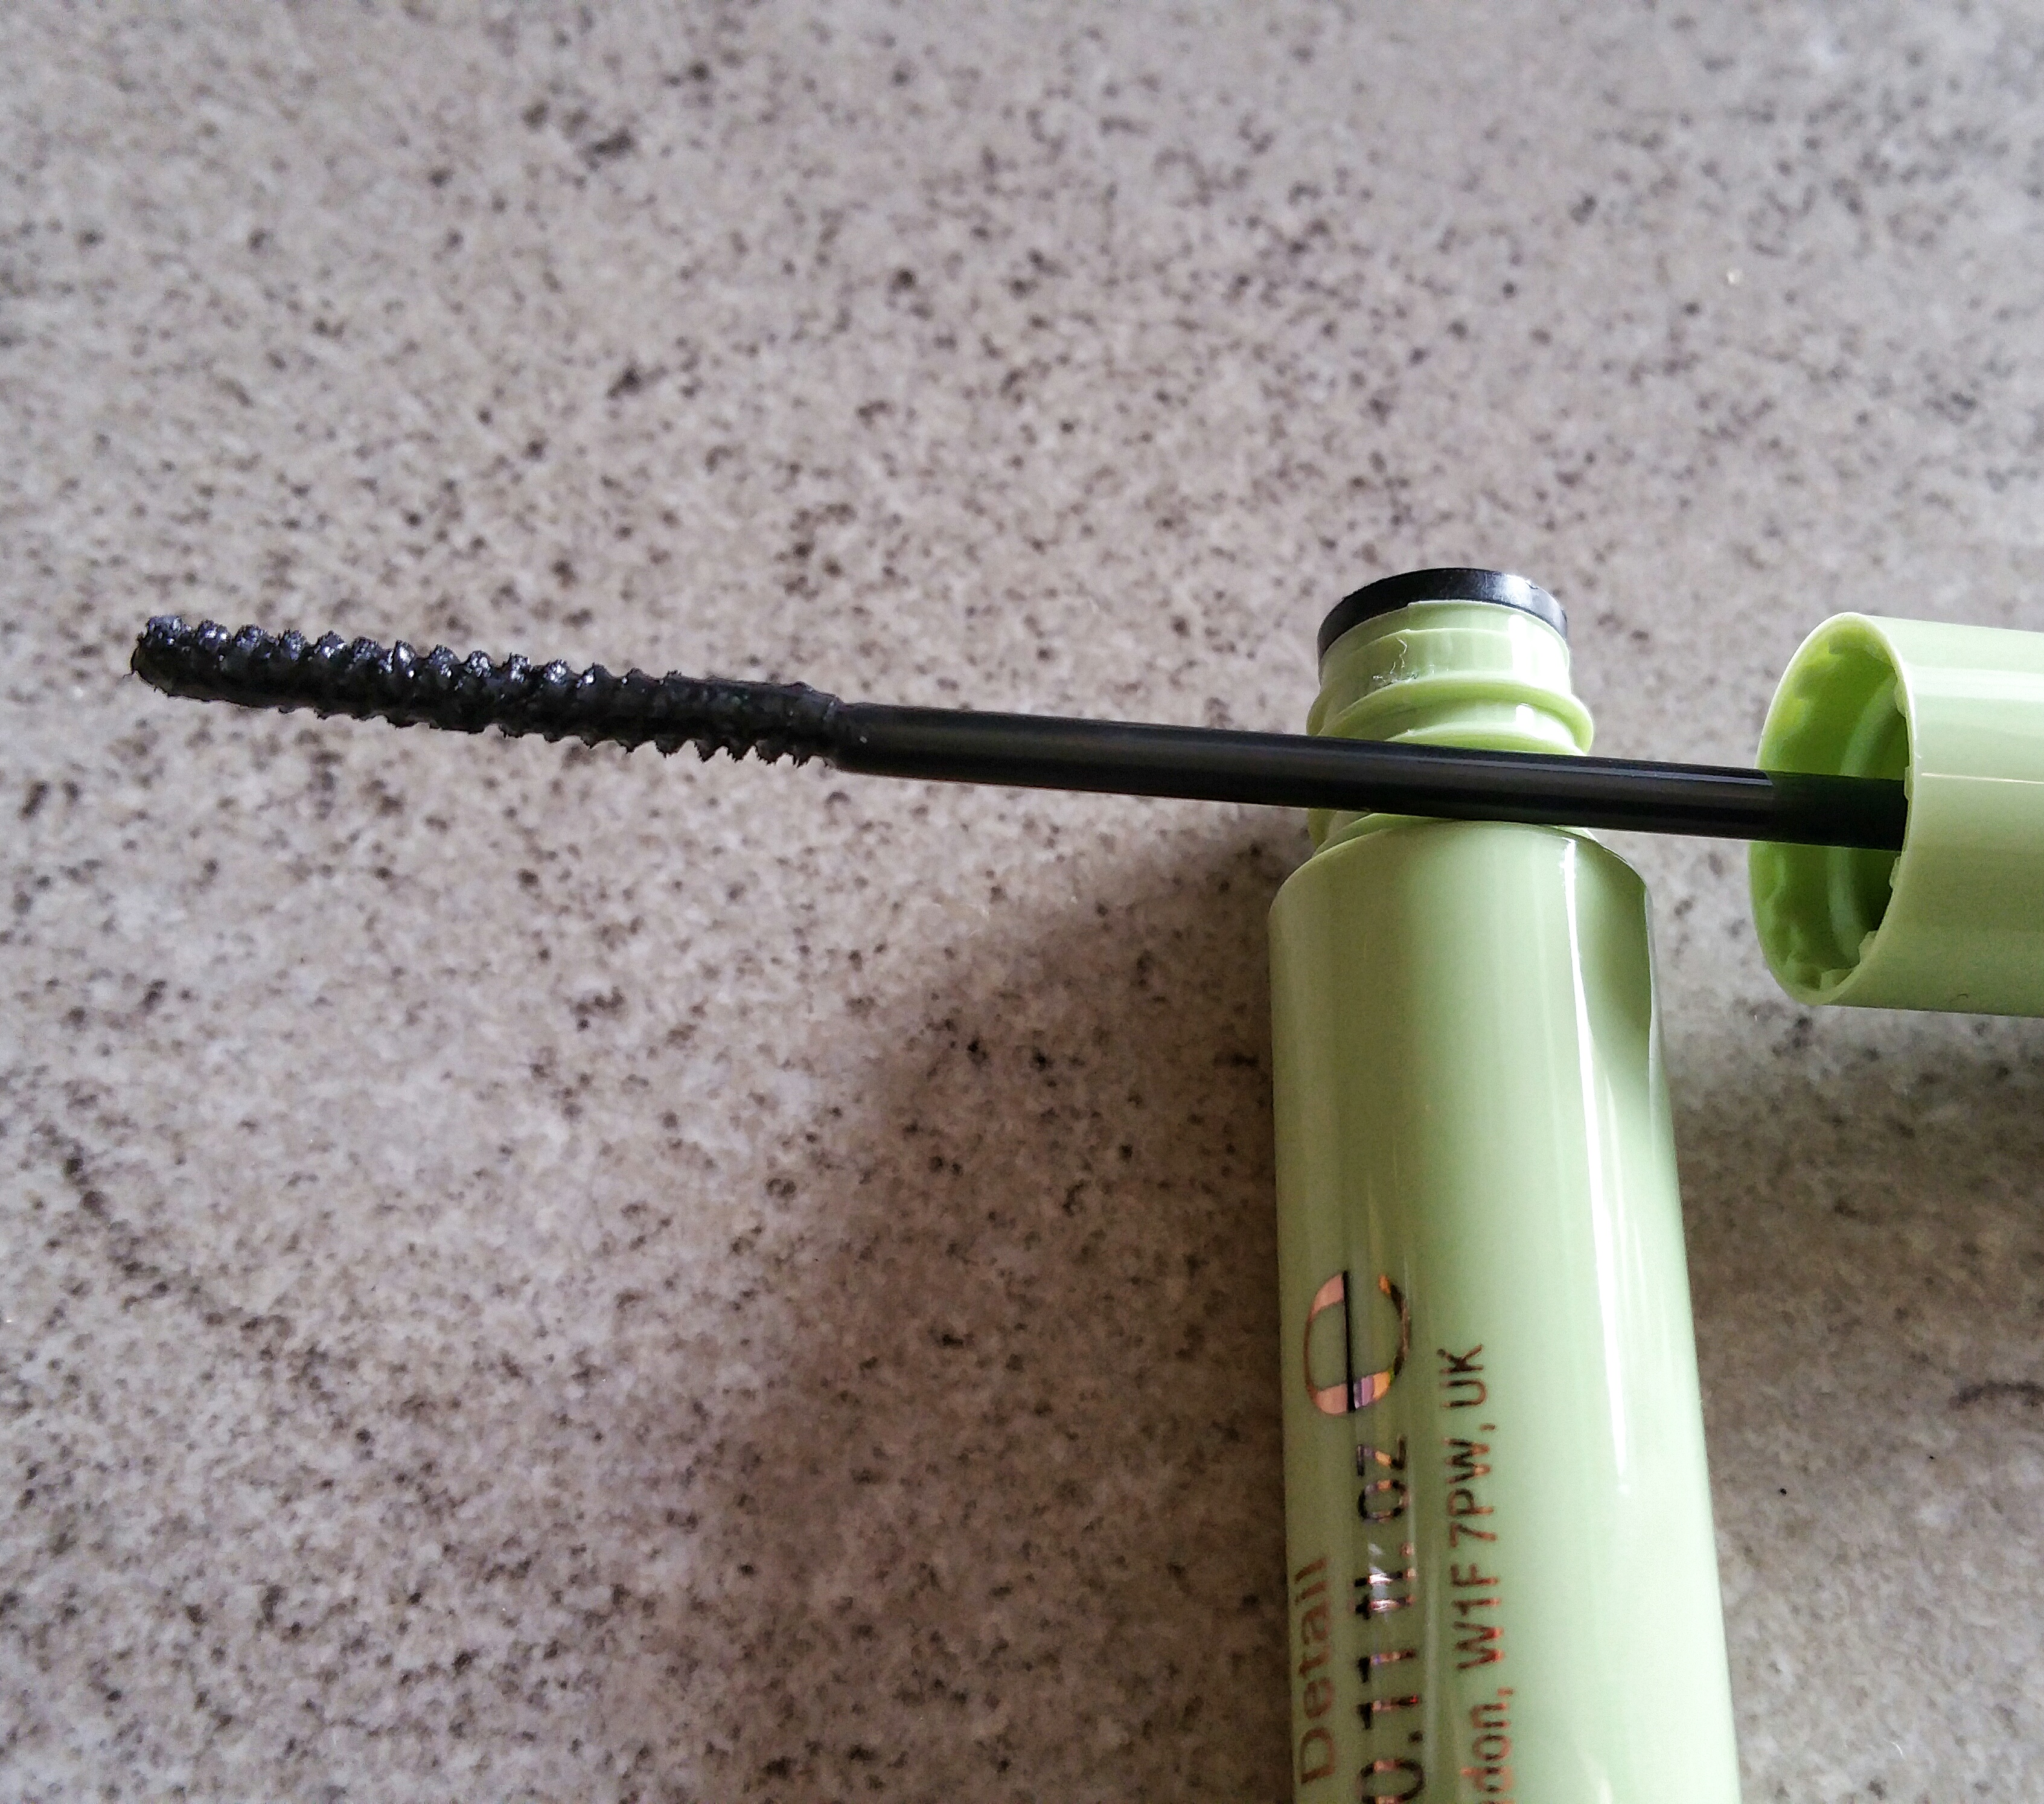 lashes, mascara, pixi beauty, pixi by petra, pixi perfection, layered lashes, lash primer, waterproof mascara, volumizing mascara, lengthening mascara, defining mascara, beauty, makeup, review, beauty review, swatches,